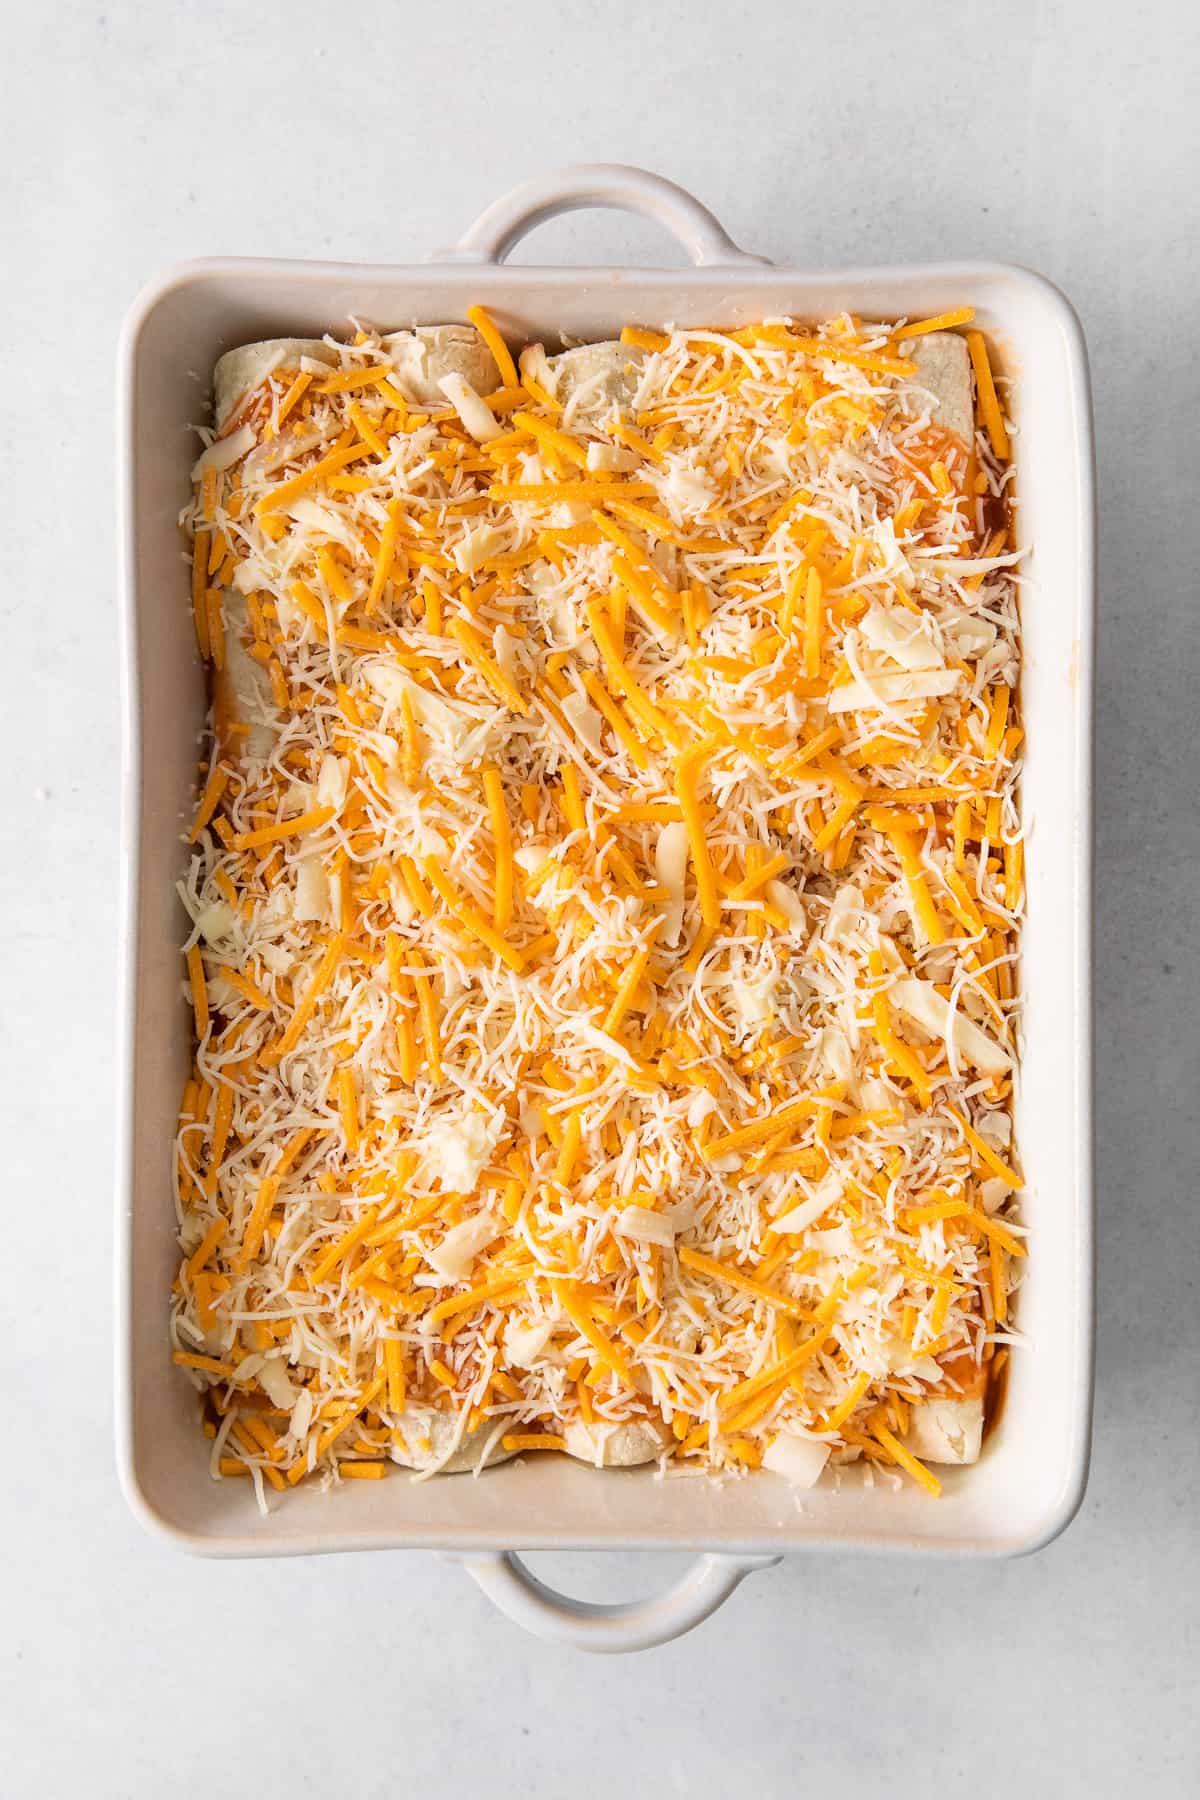 Enchiladas covered in shredded cheese in a casserole dish.